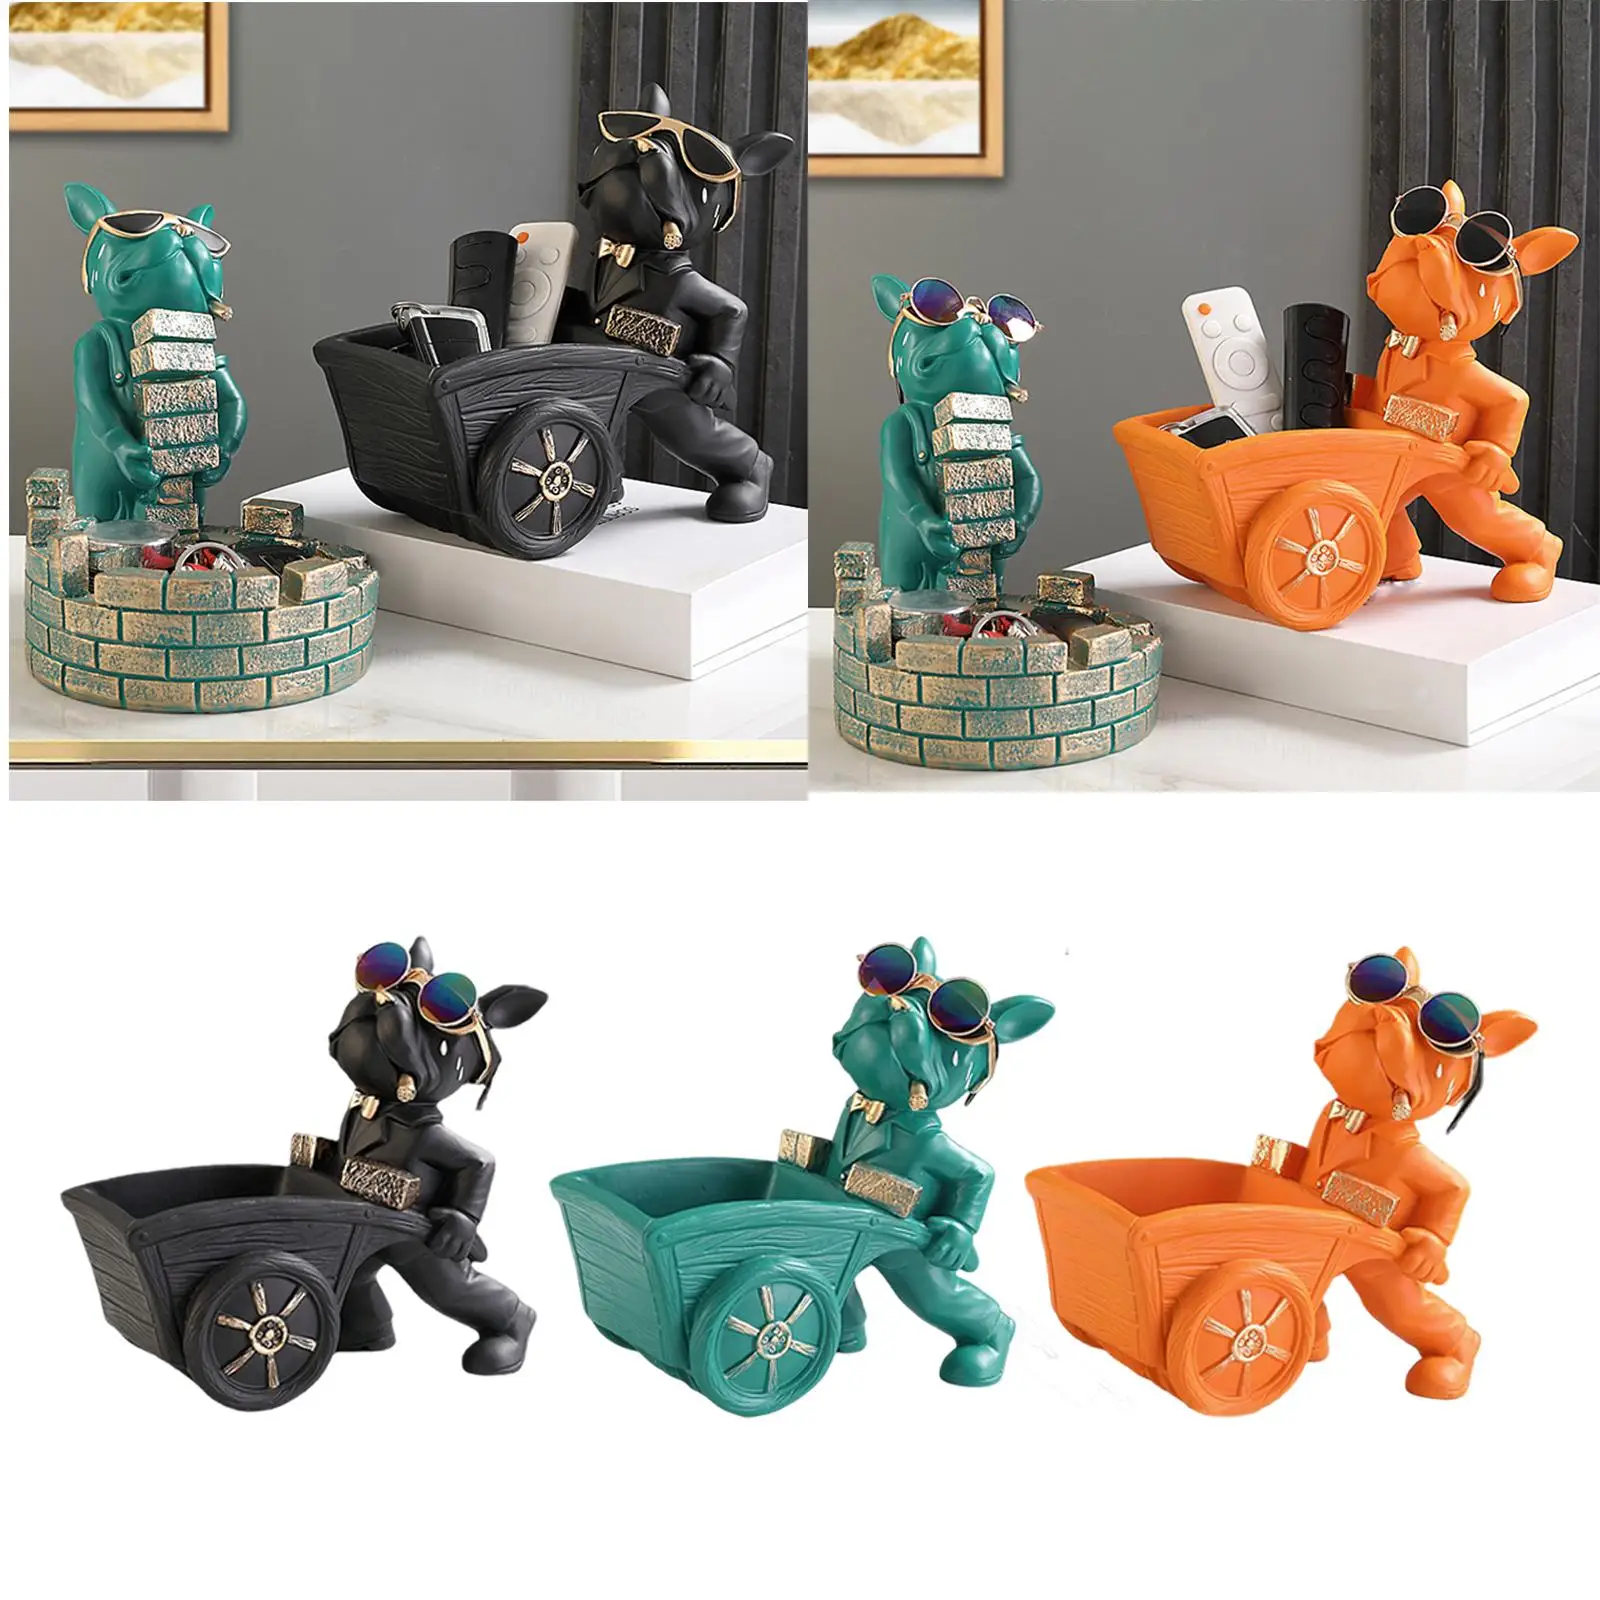 Dog Sculpture with Serving Tray Puppy Statue for TV Cabinet Decoration